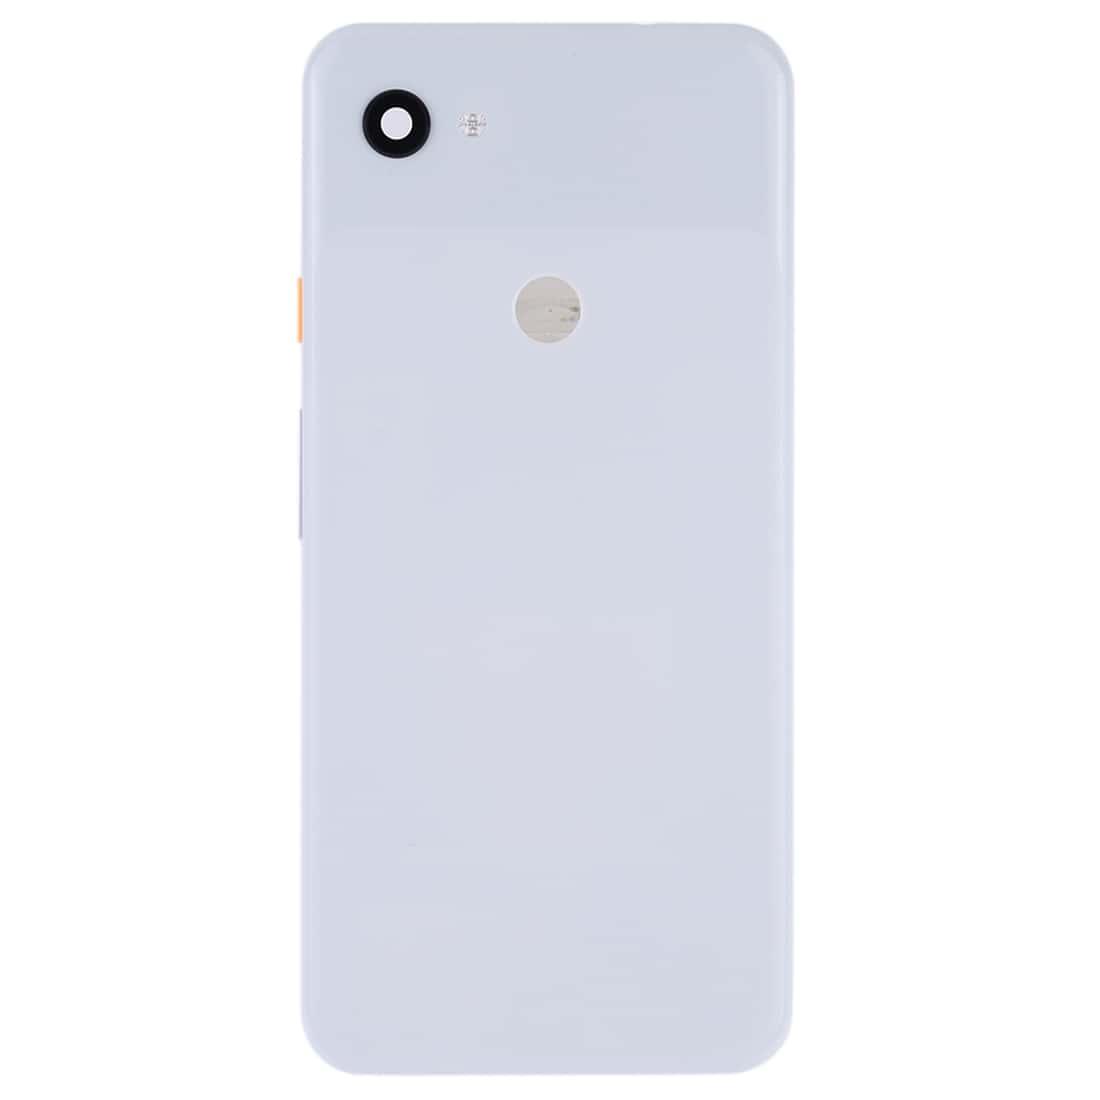 Back Glass Panel for Google Pixel 3A XL White with Camera Lens